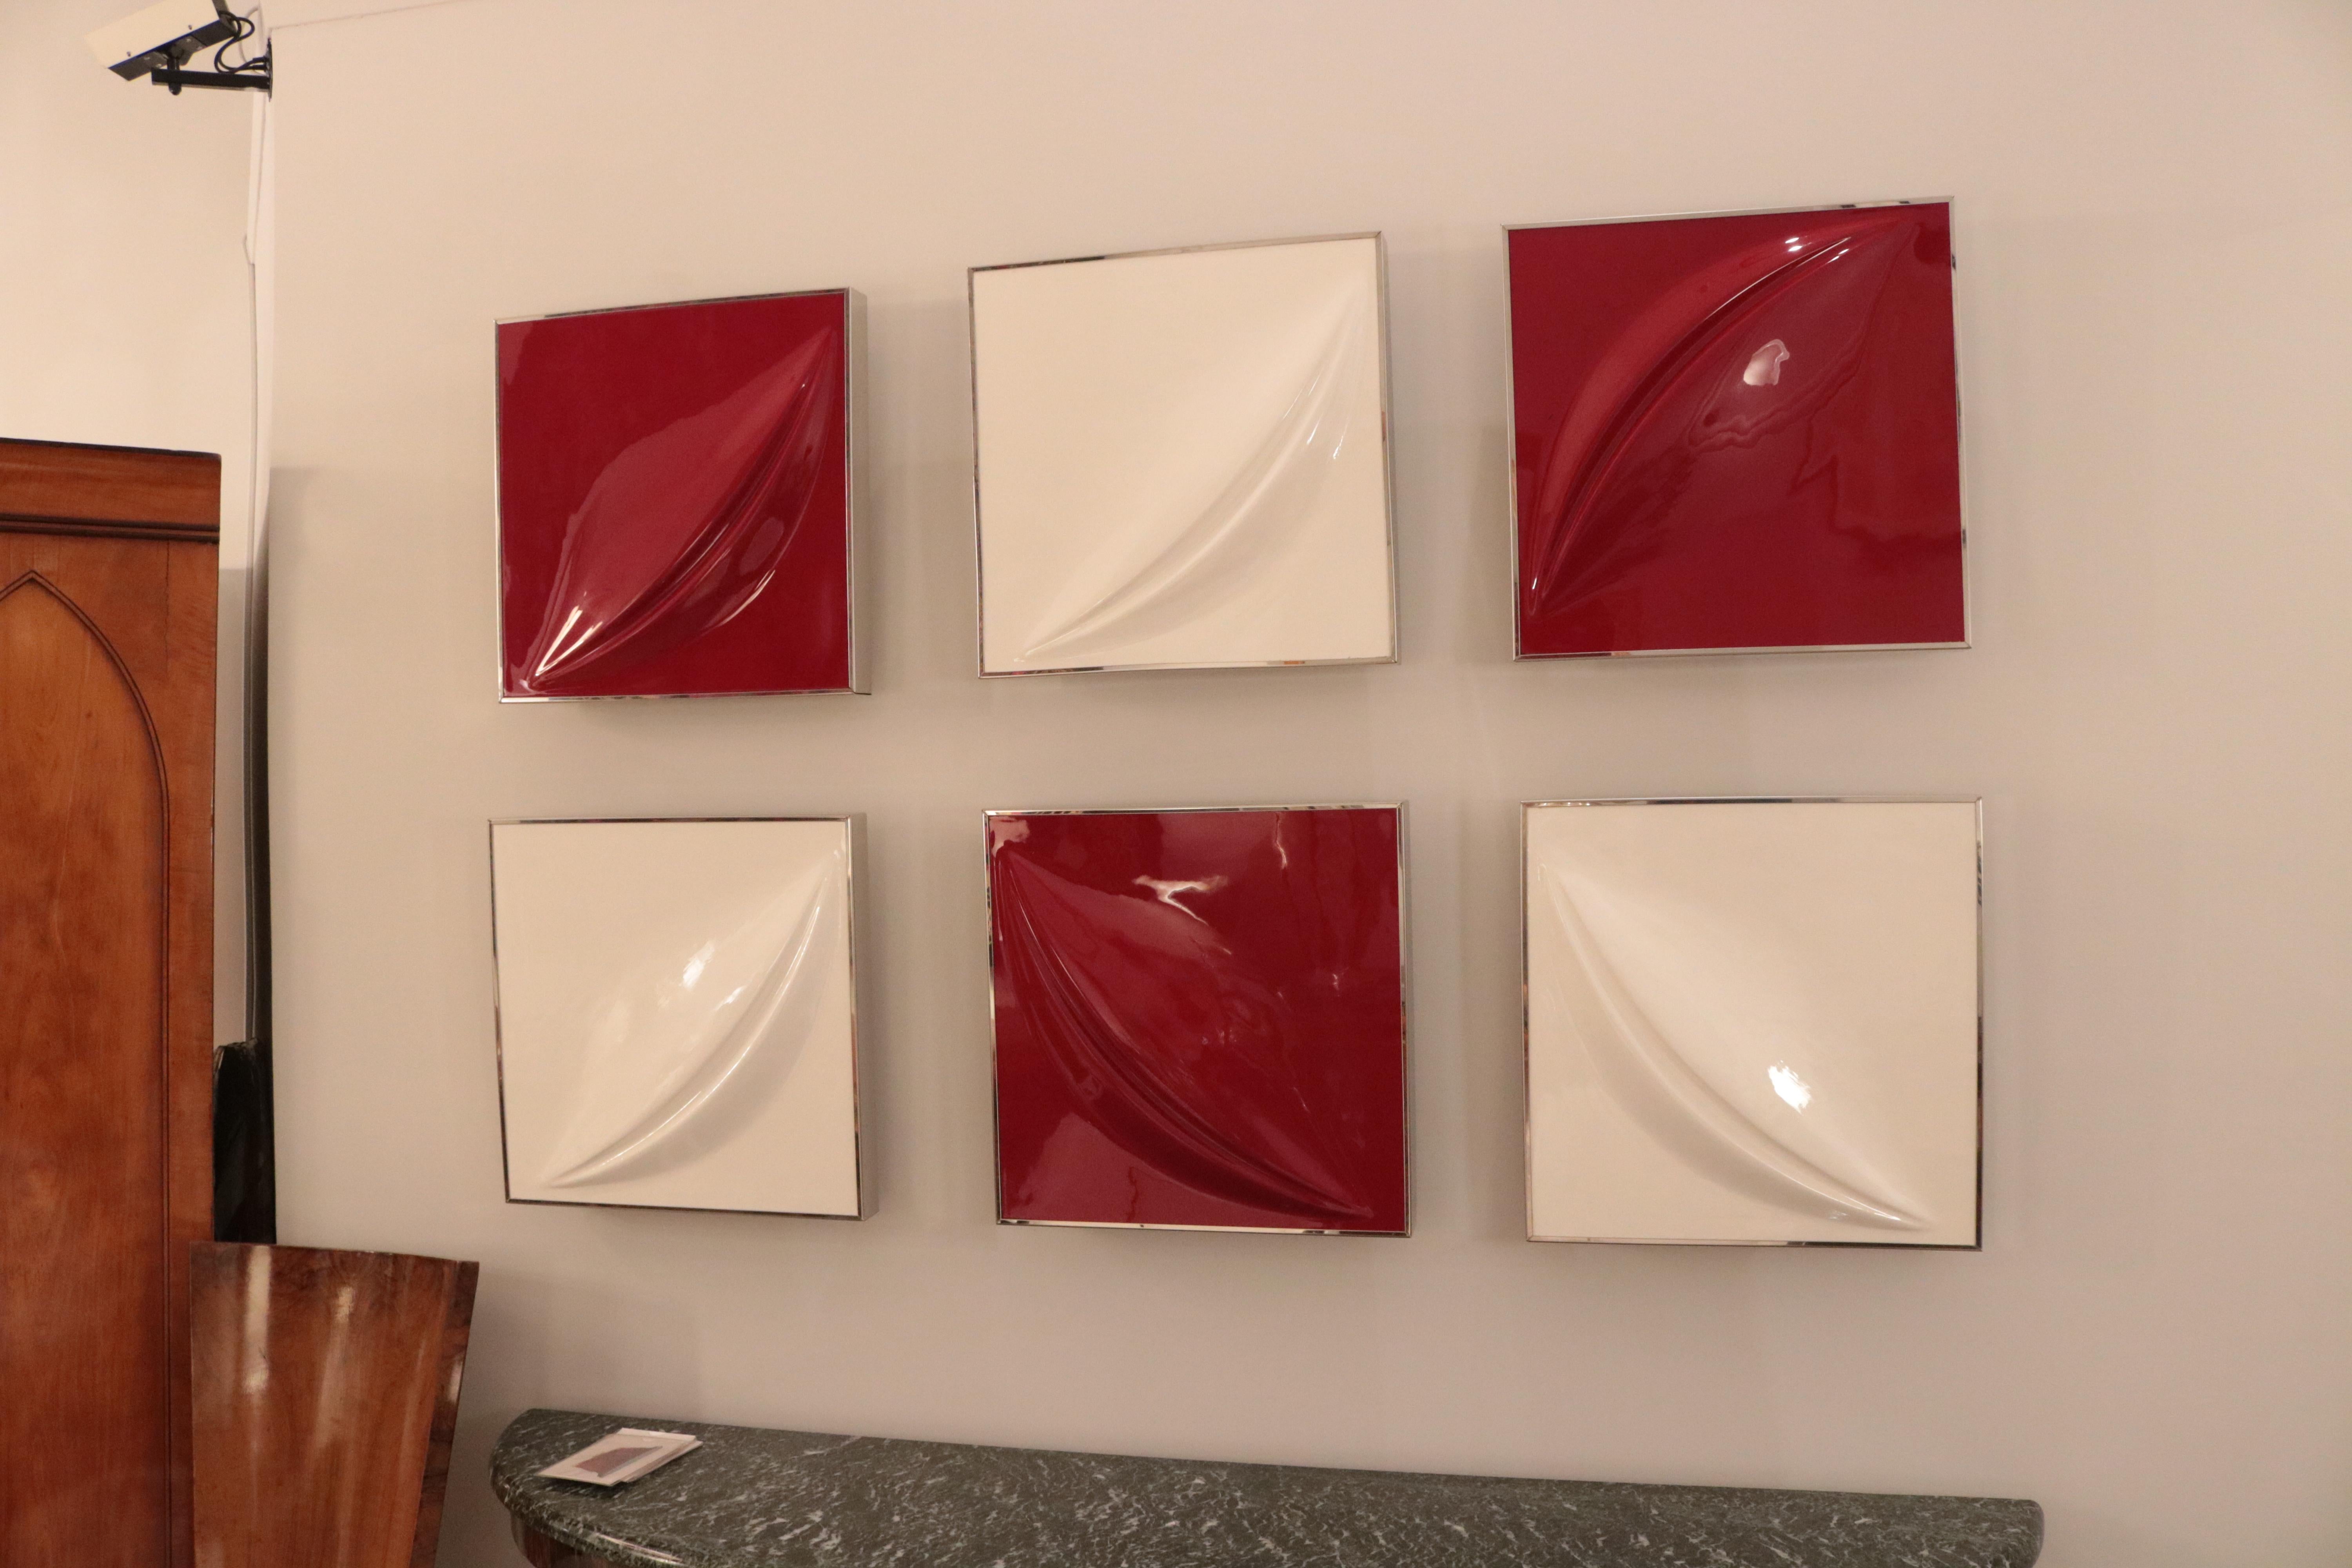 A set of six modernist wall reliefs.
Abstract red and white fibreglass forms mounted in chrome-plated frames.
       